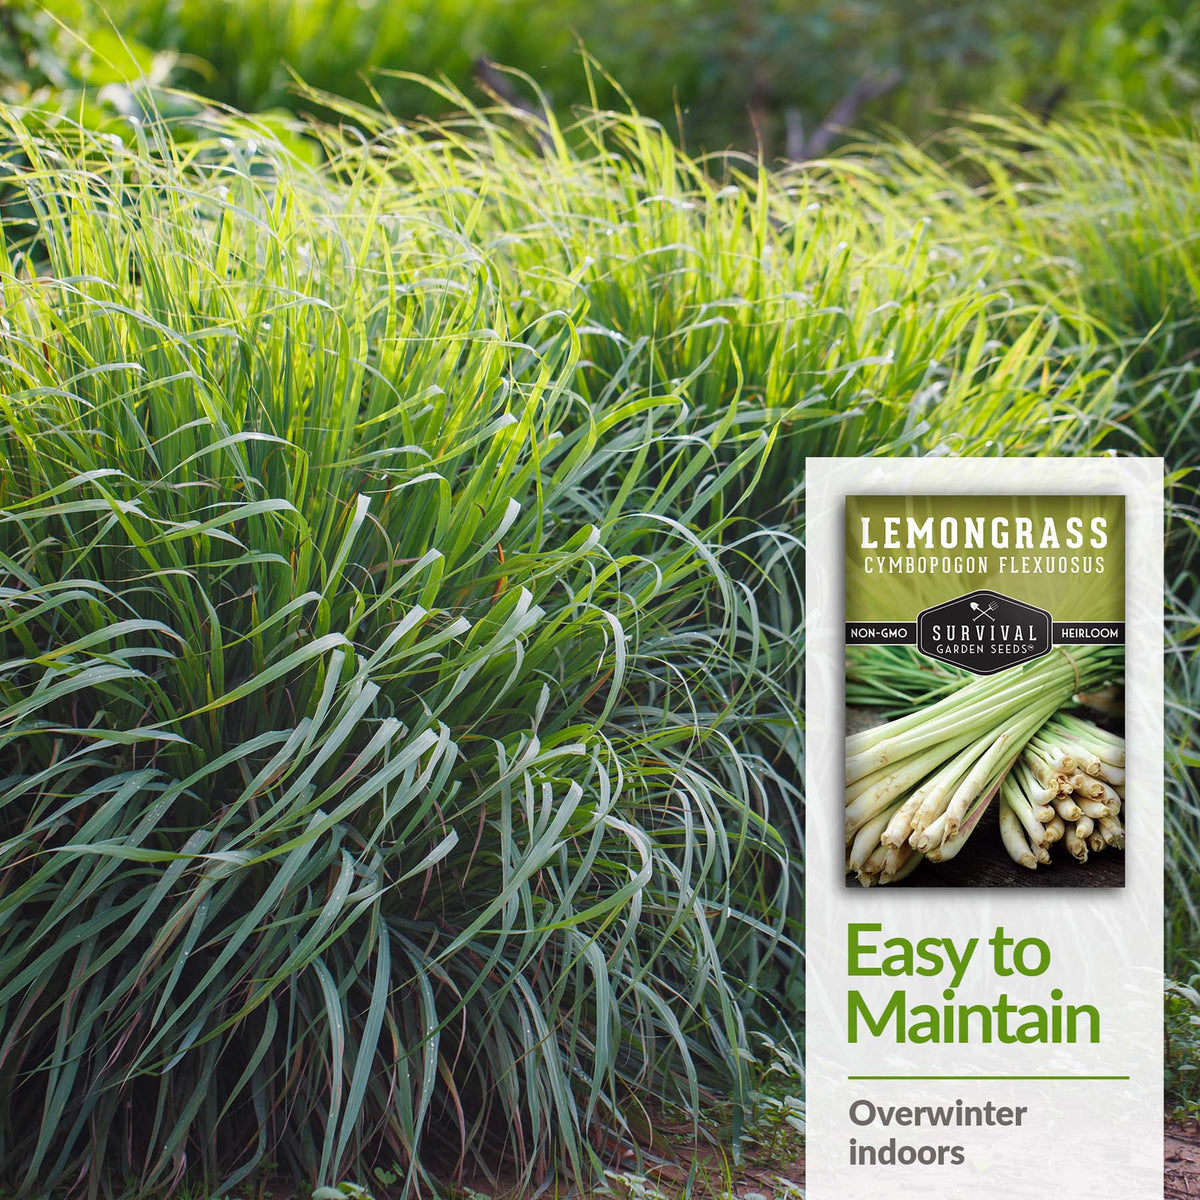 Lemongrass can be overwintered indoors